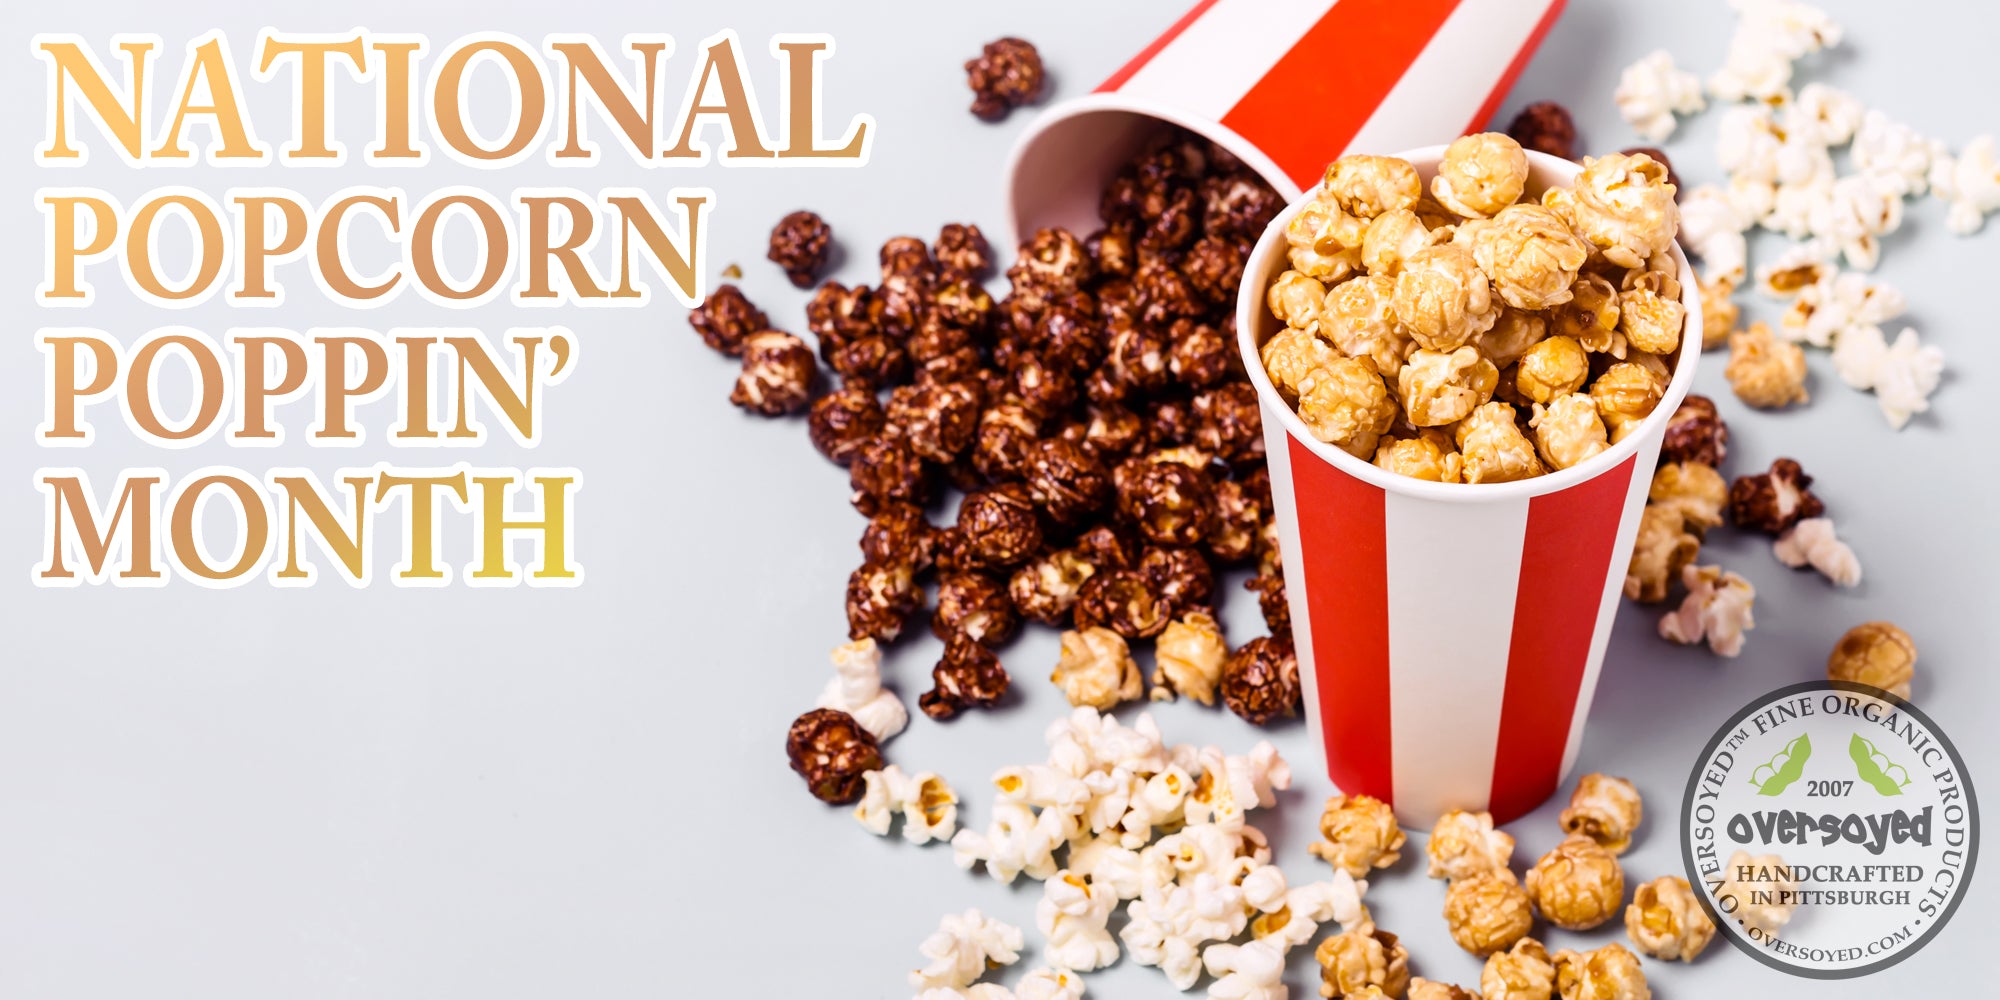 OverSoyed Fine Organic Products - National Popcorn Poppin' Month